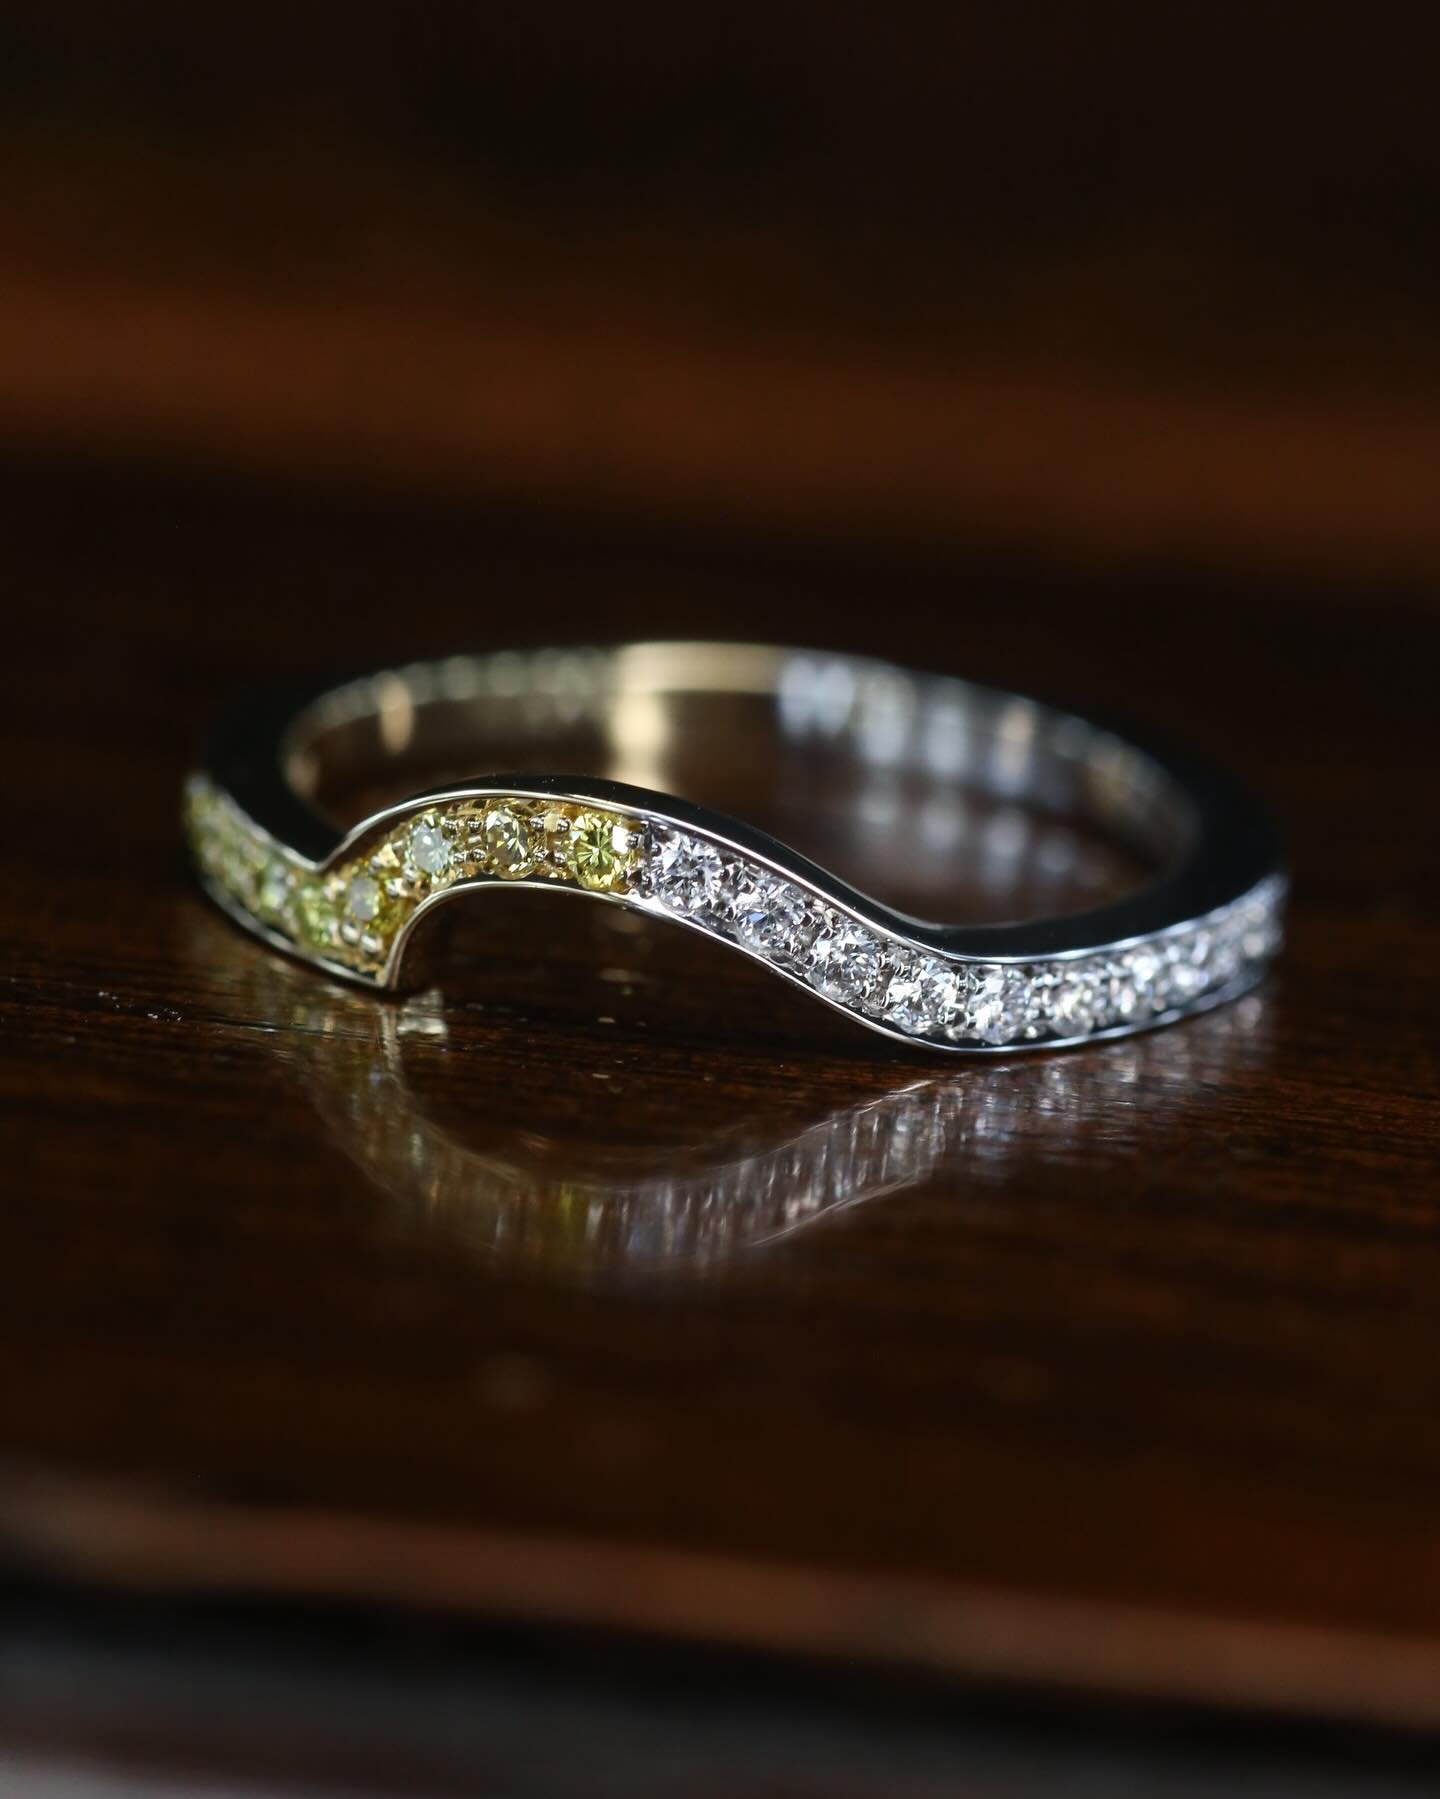 Super unique wedding band 💛🤍

Made to fit snug around a Toi et Moi engagement ring with a yellow and white diamond. 💍 

I designed this not only to mirror the white and yellow diamonds of the engagement ring but adding the two tone yellow and whit